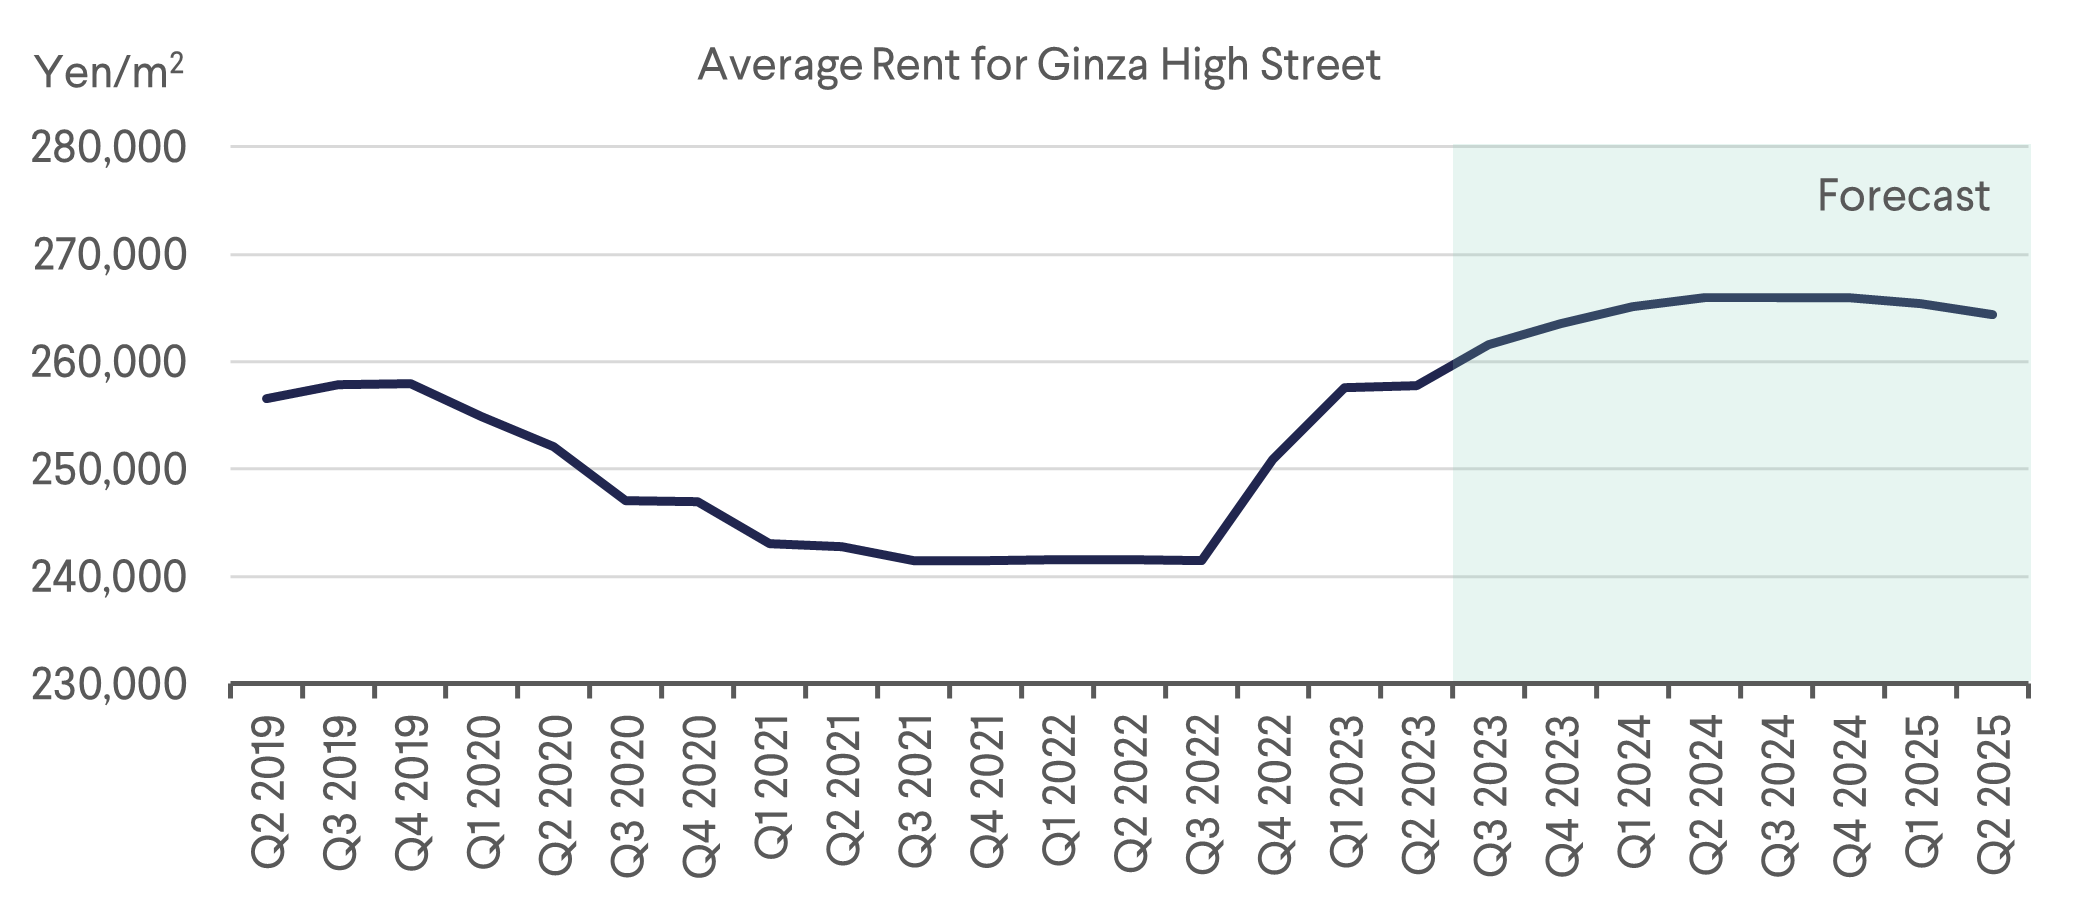 Average Rent for Ginza High Street